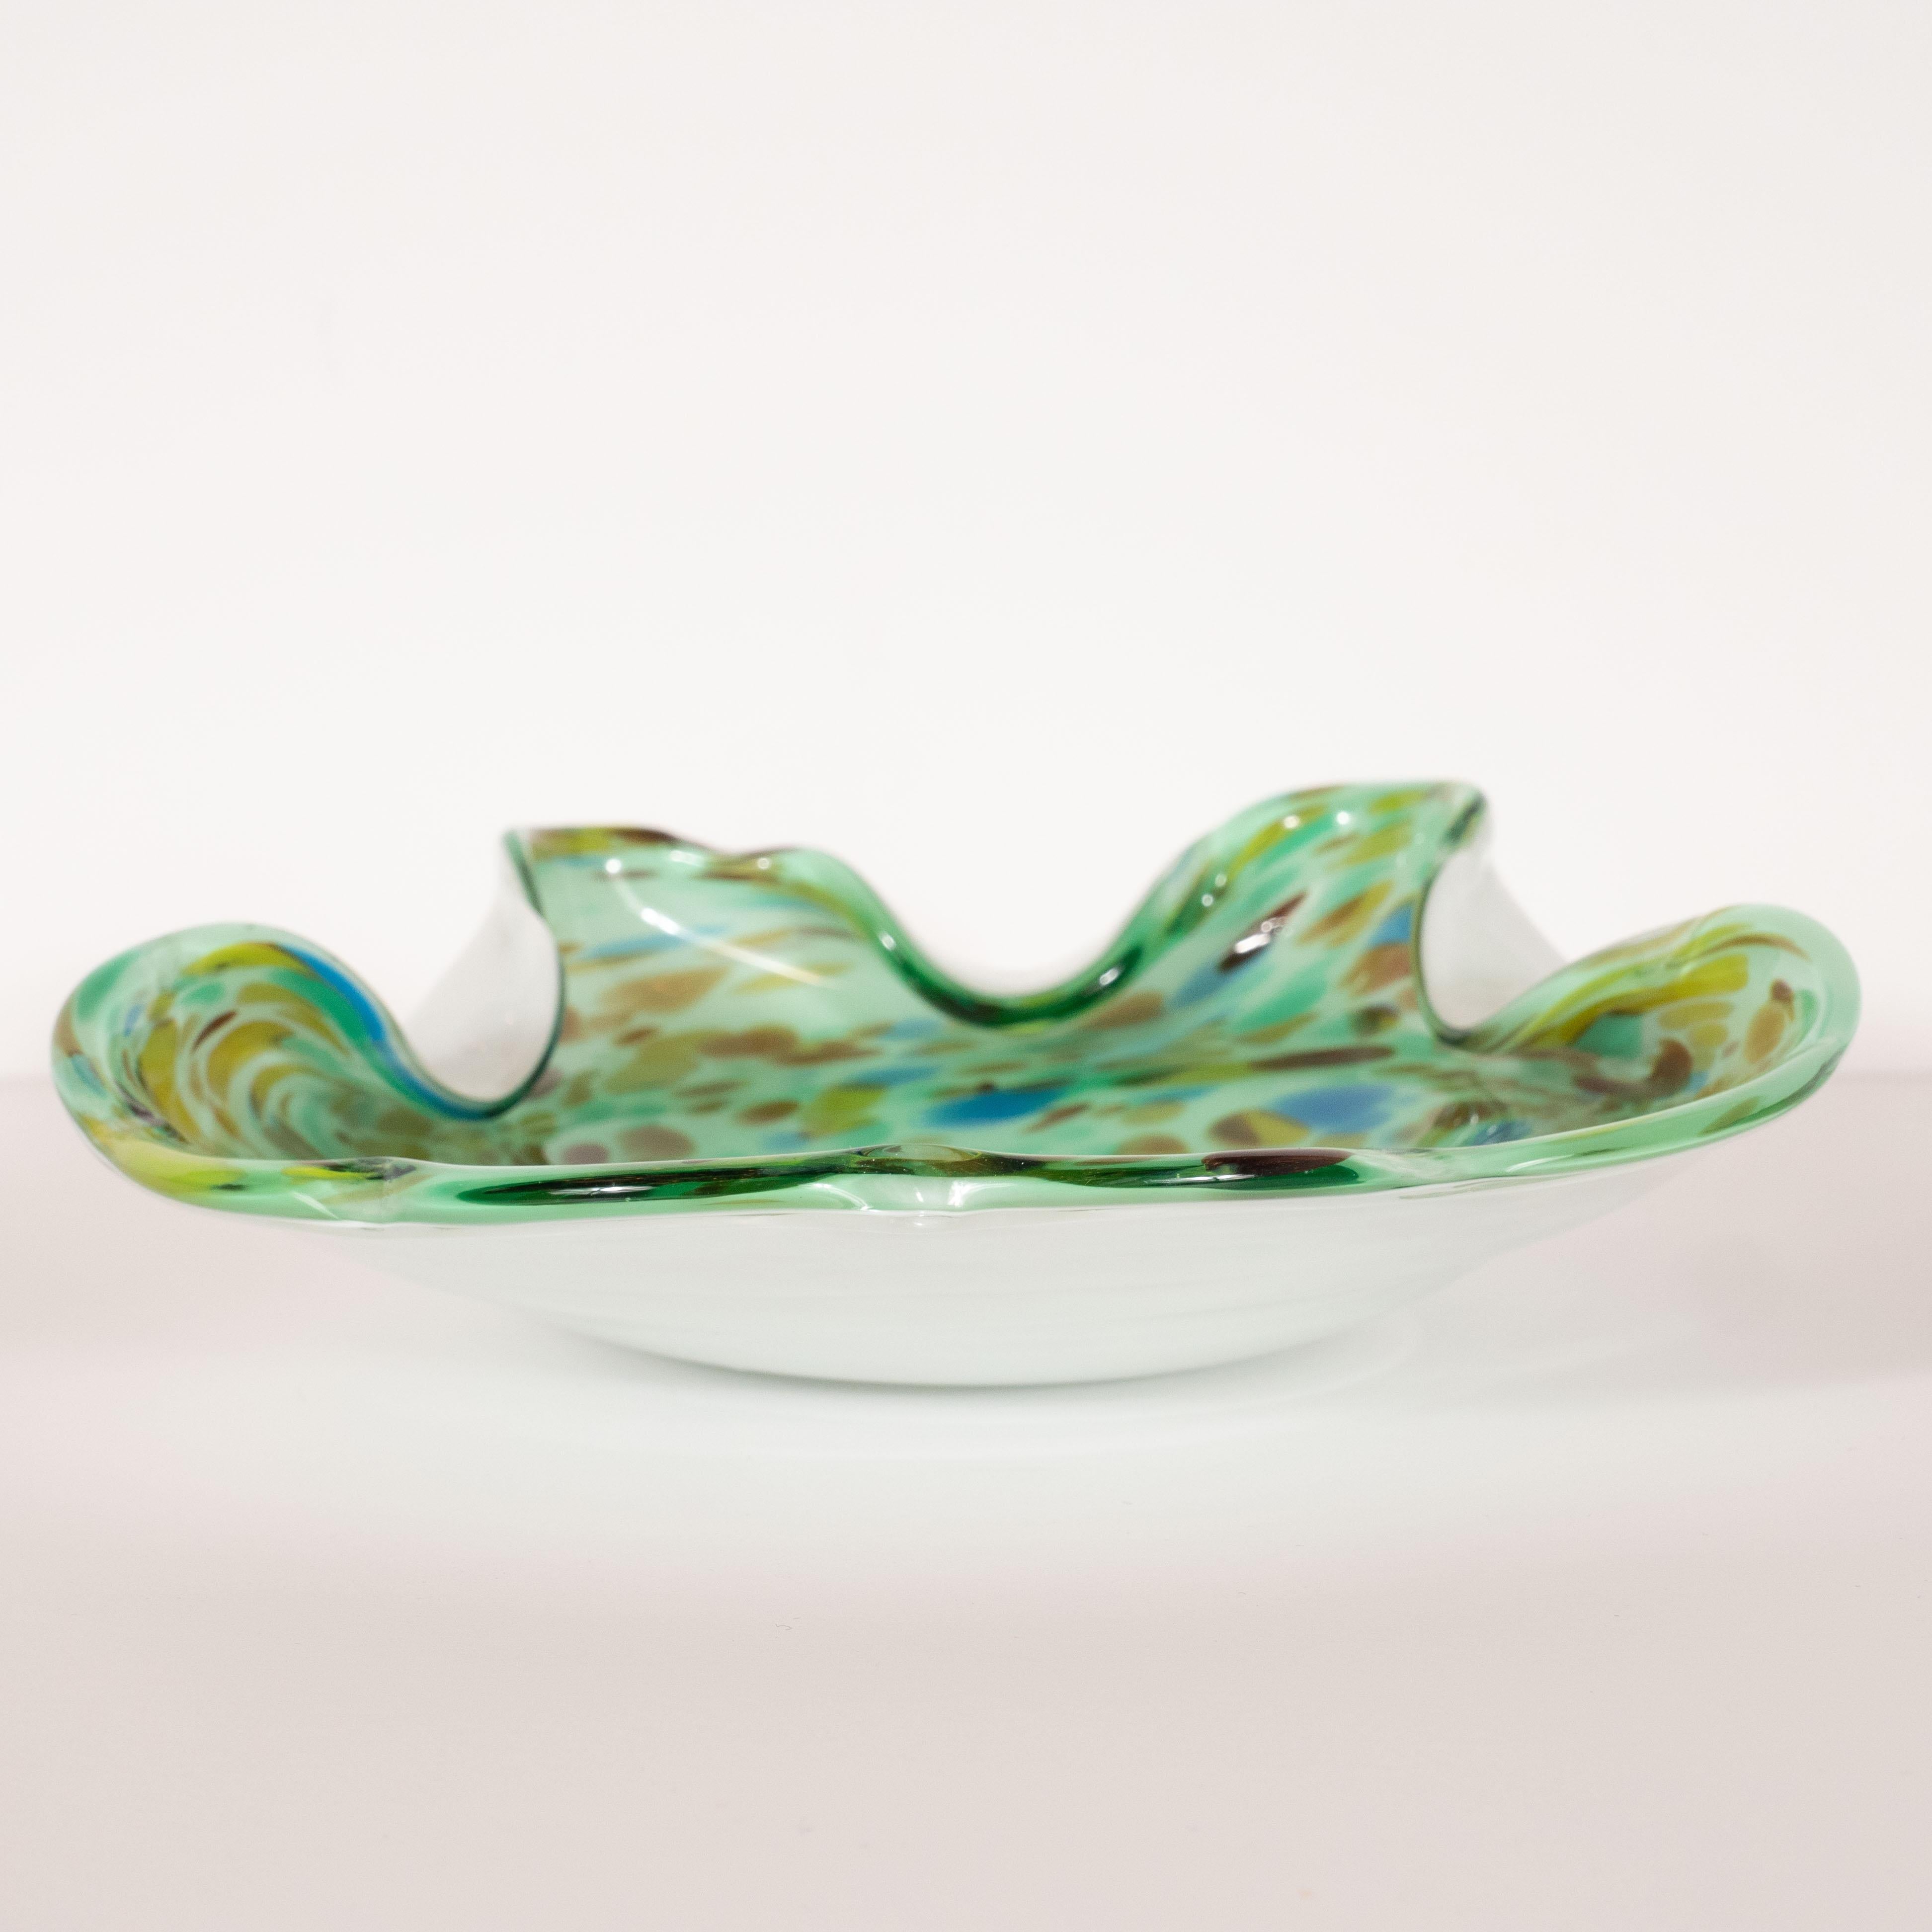 This stunning Mid-Century Modern decorative bowl was realized in Murano, Italy- the island off the coast of Venice renowned for centuries for its superlative glass production, circa 1960. It features a sinuously curved perimeter with depressions on